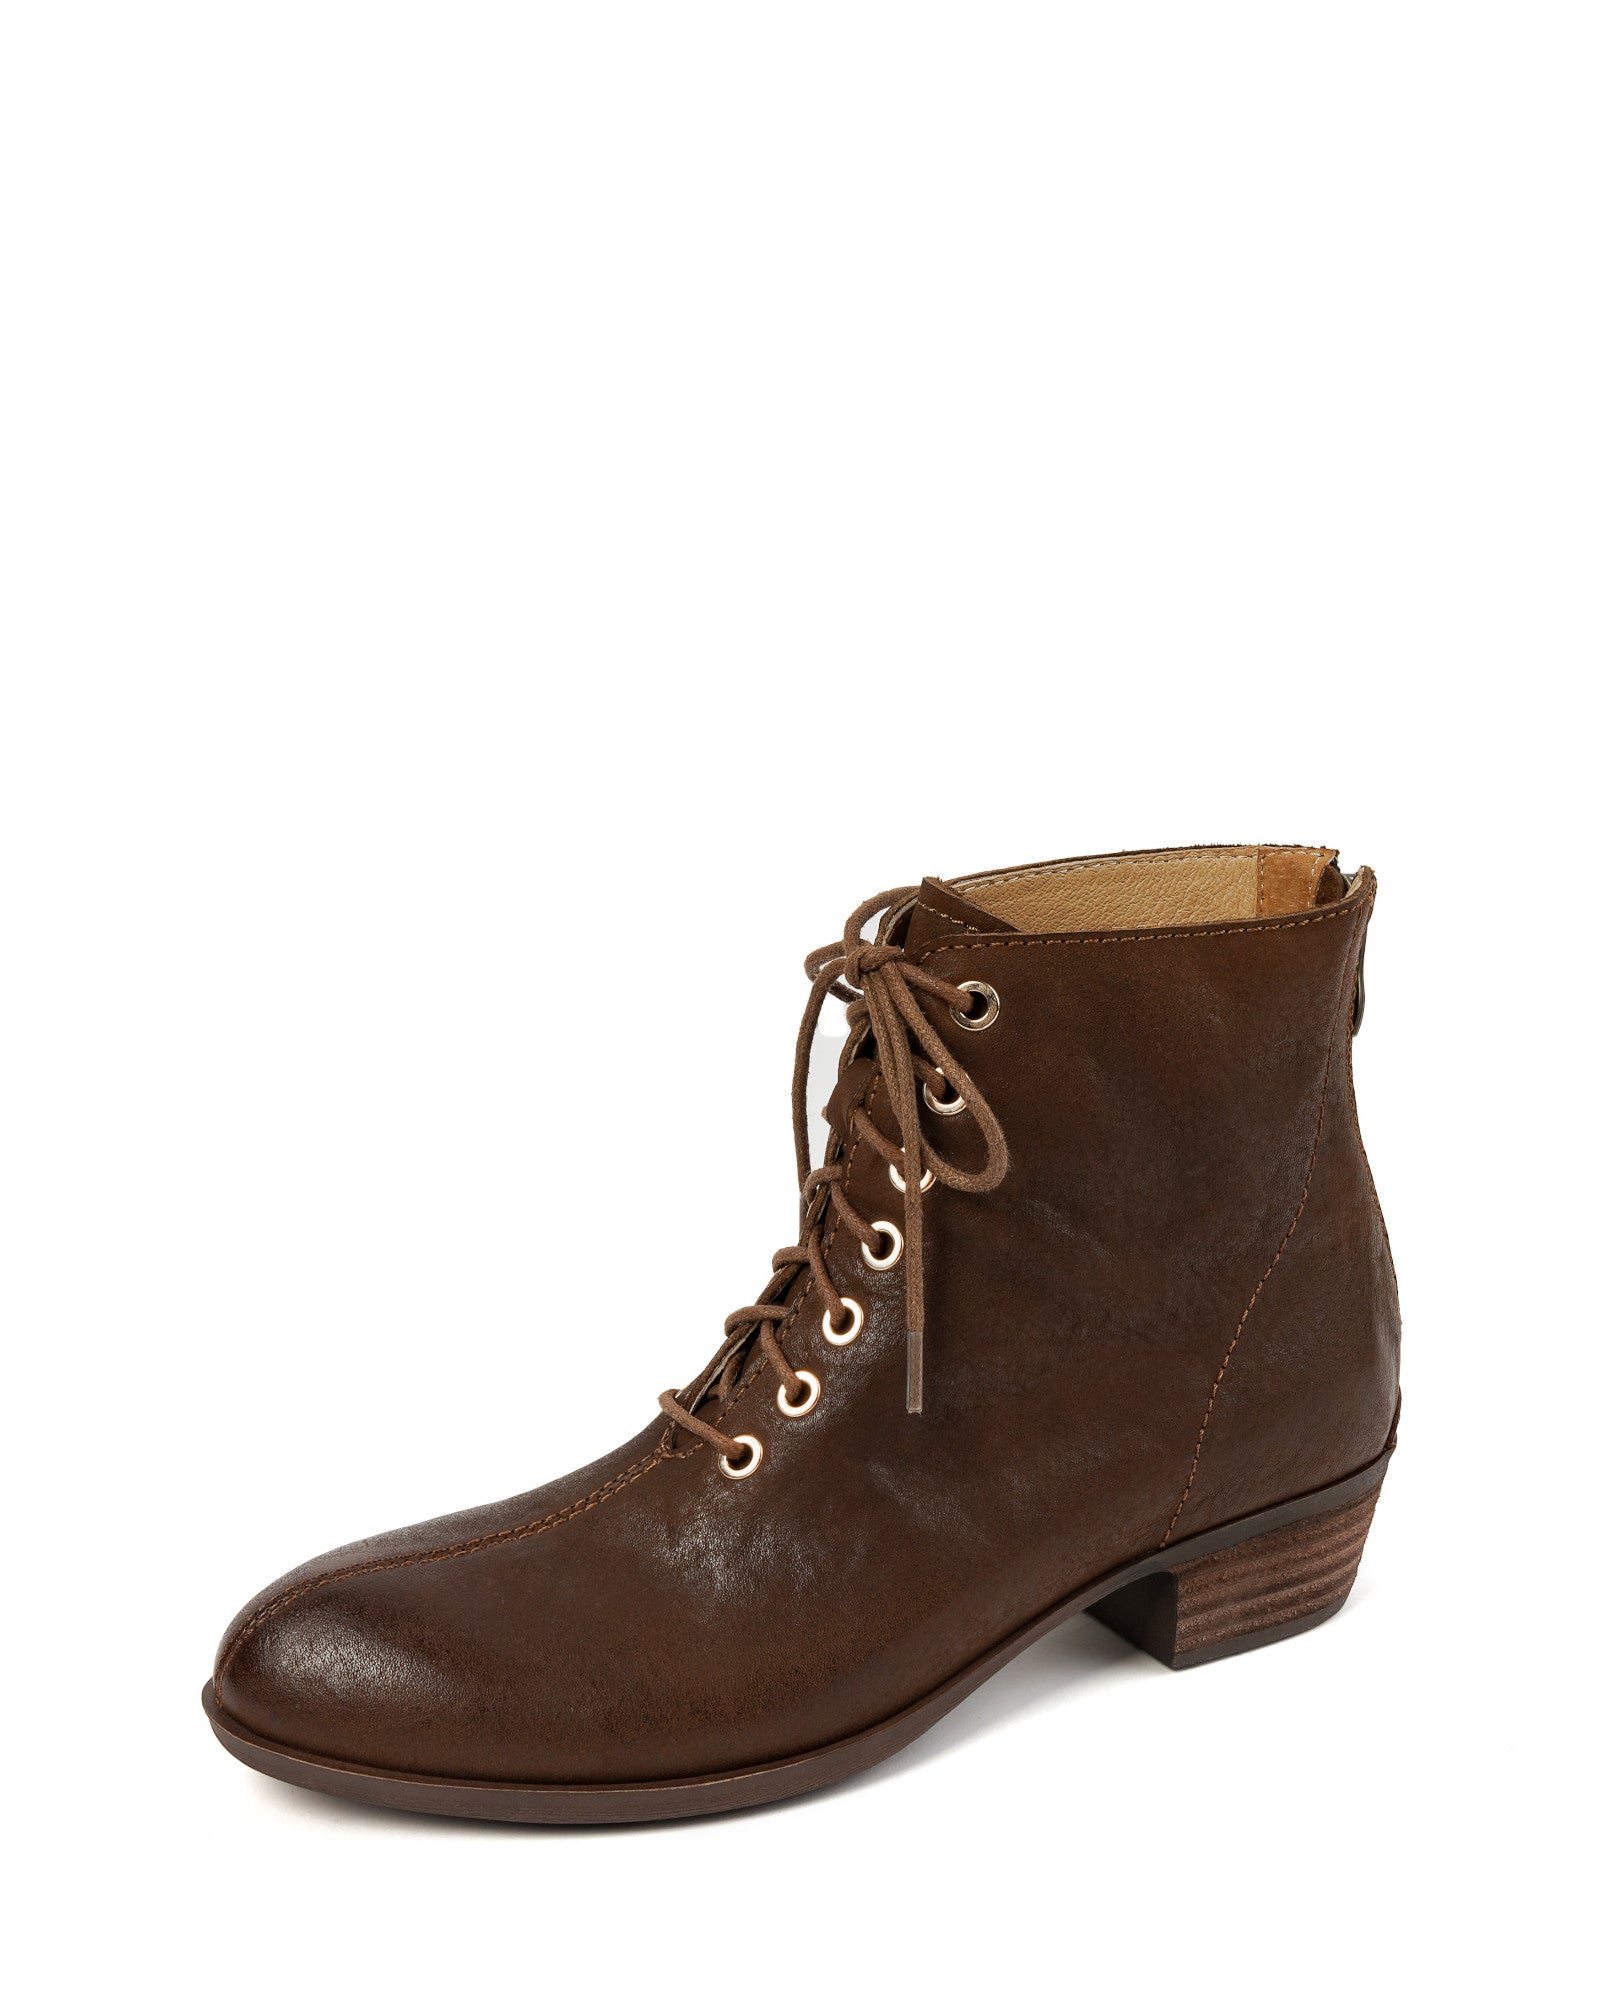 Kenora-ankle-boots-brown-leather